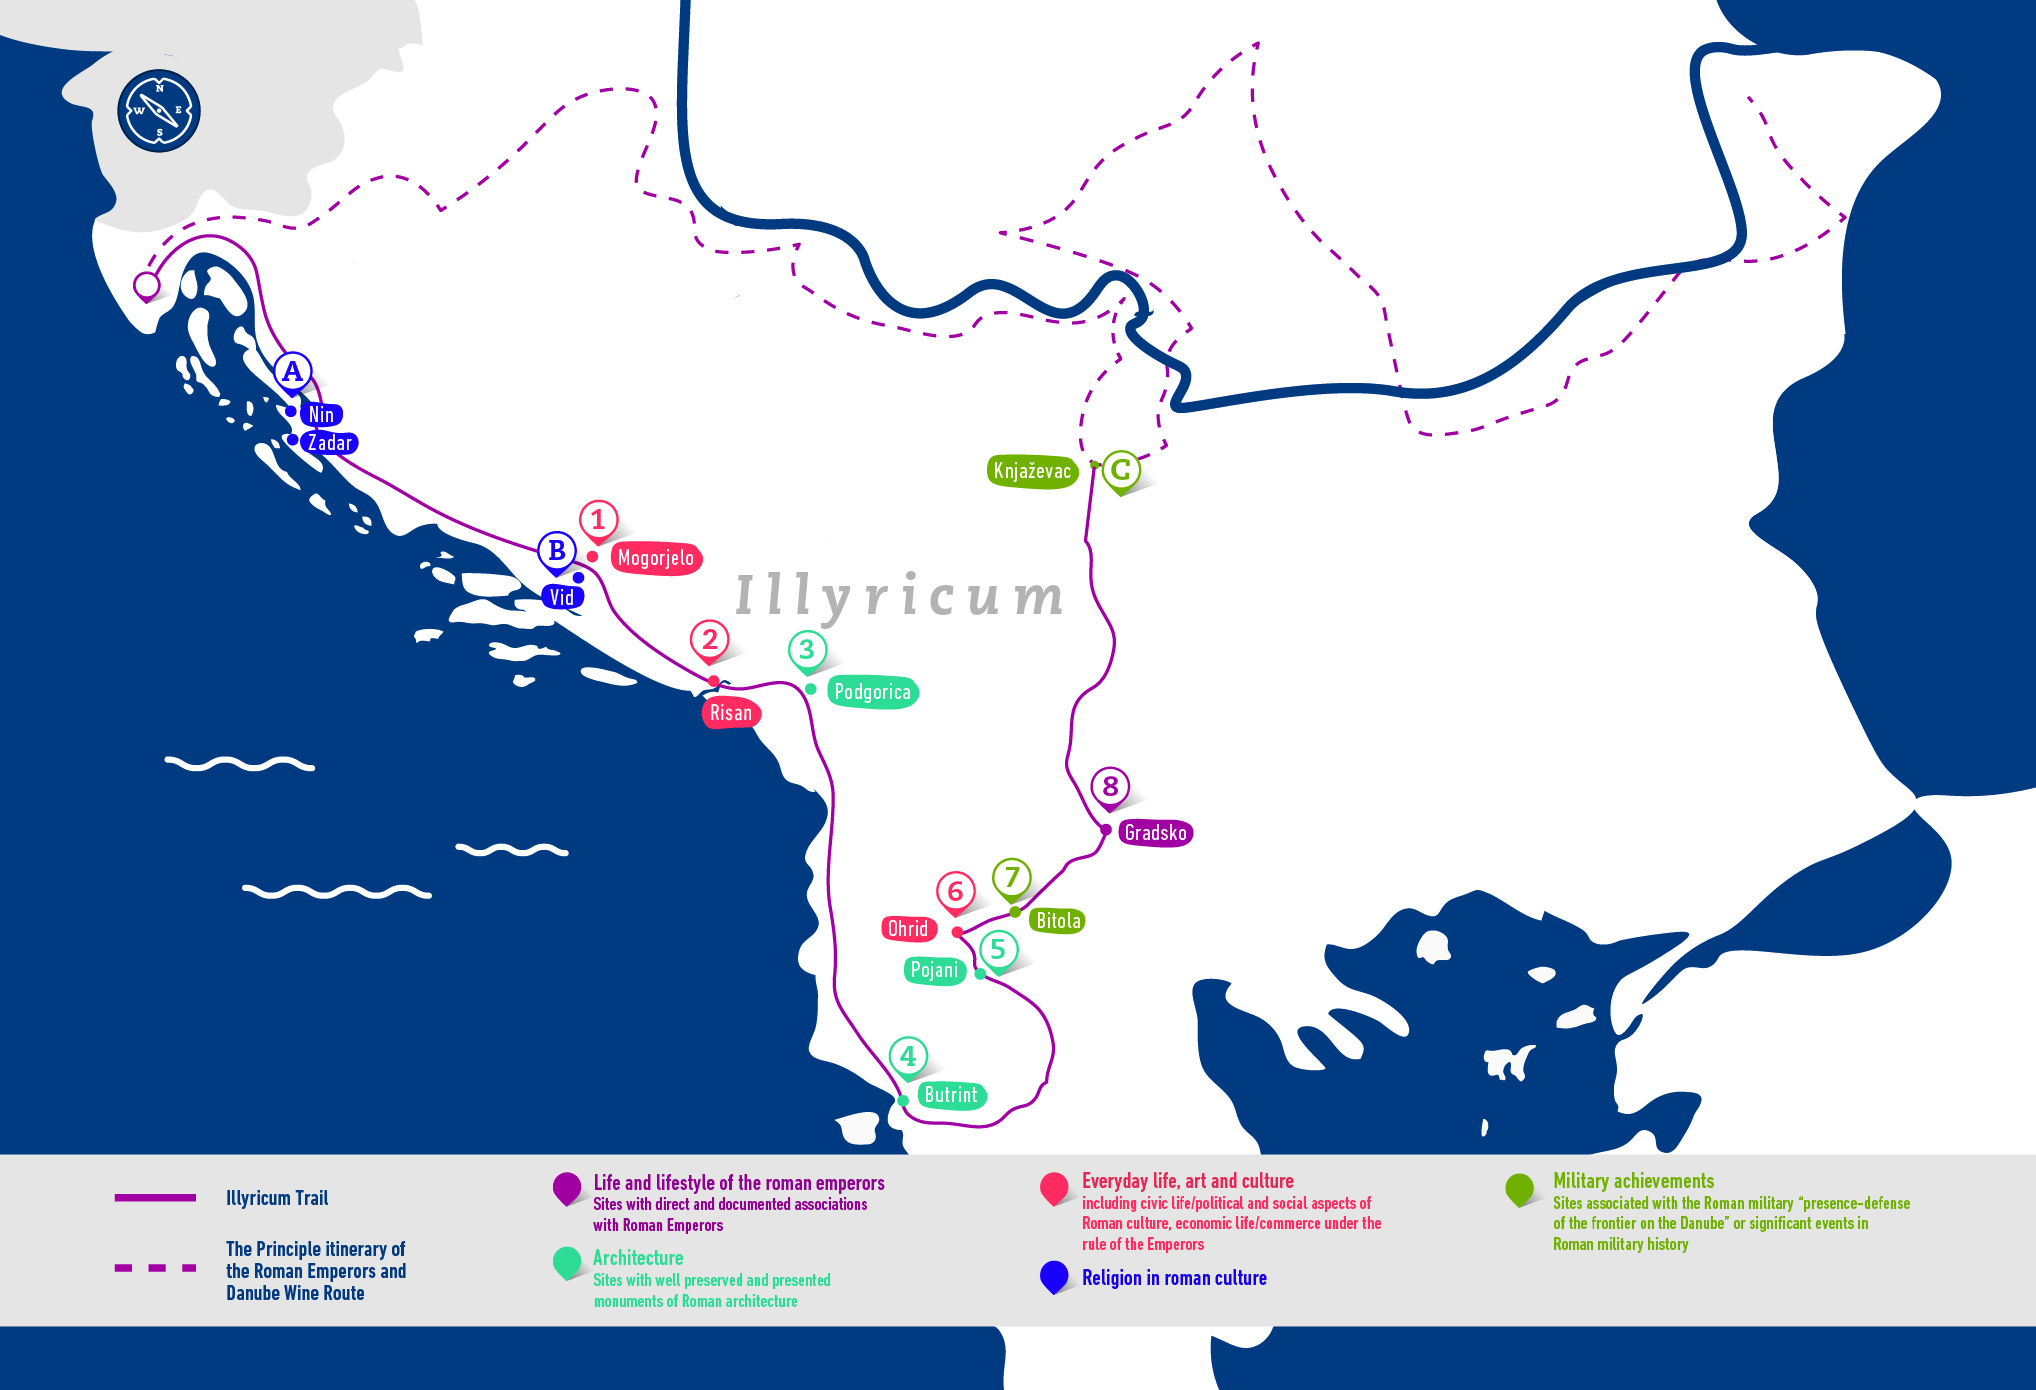 PROMO FLYER: Roman Emperors and Danube Wine Route’s Illyricum Trail